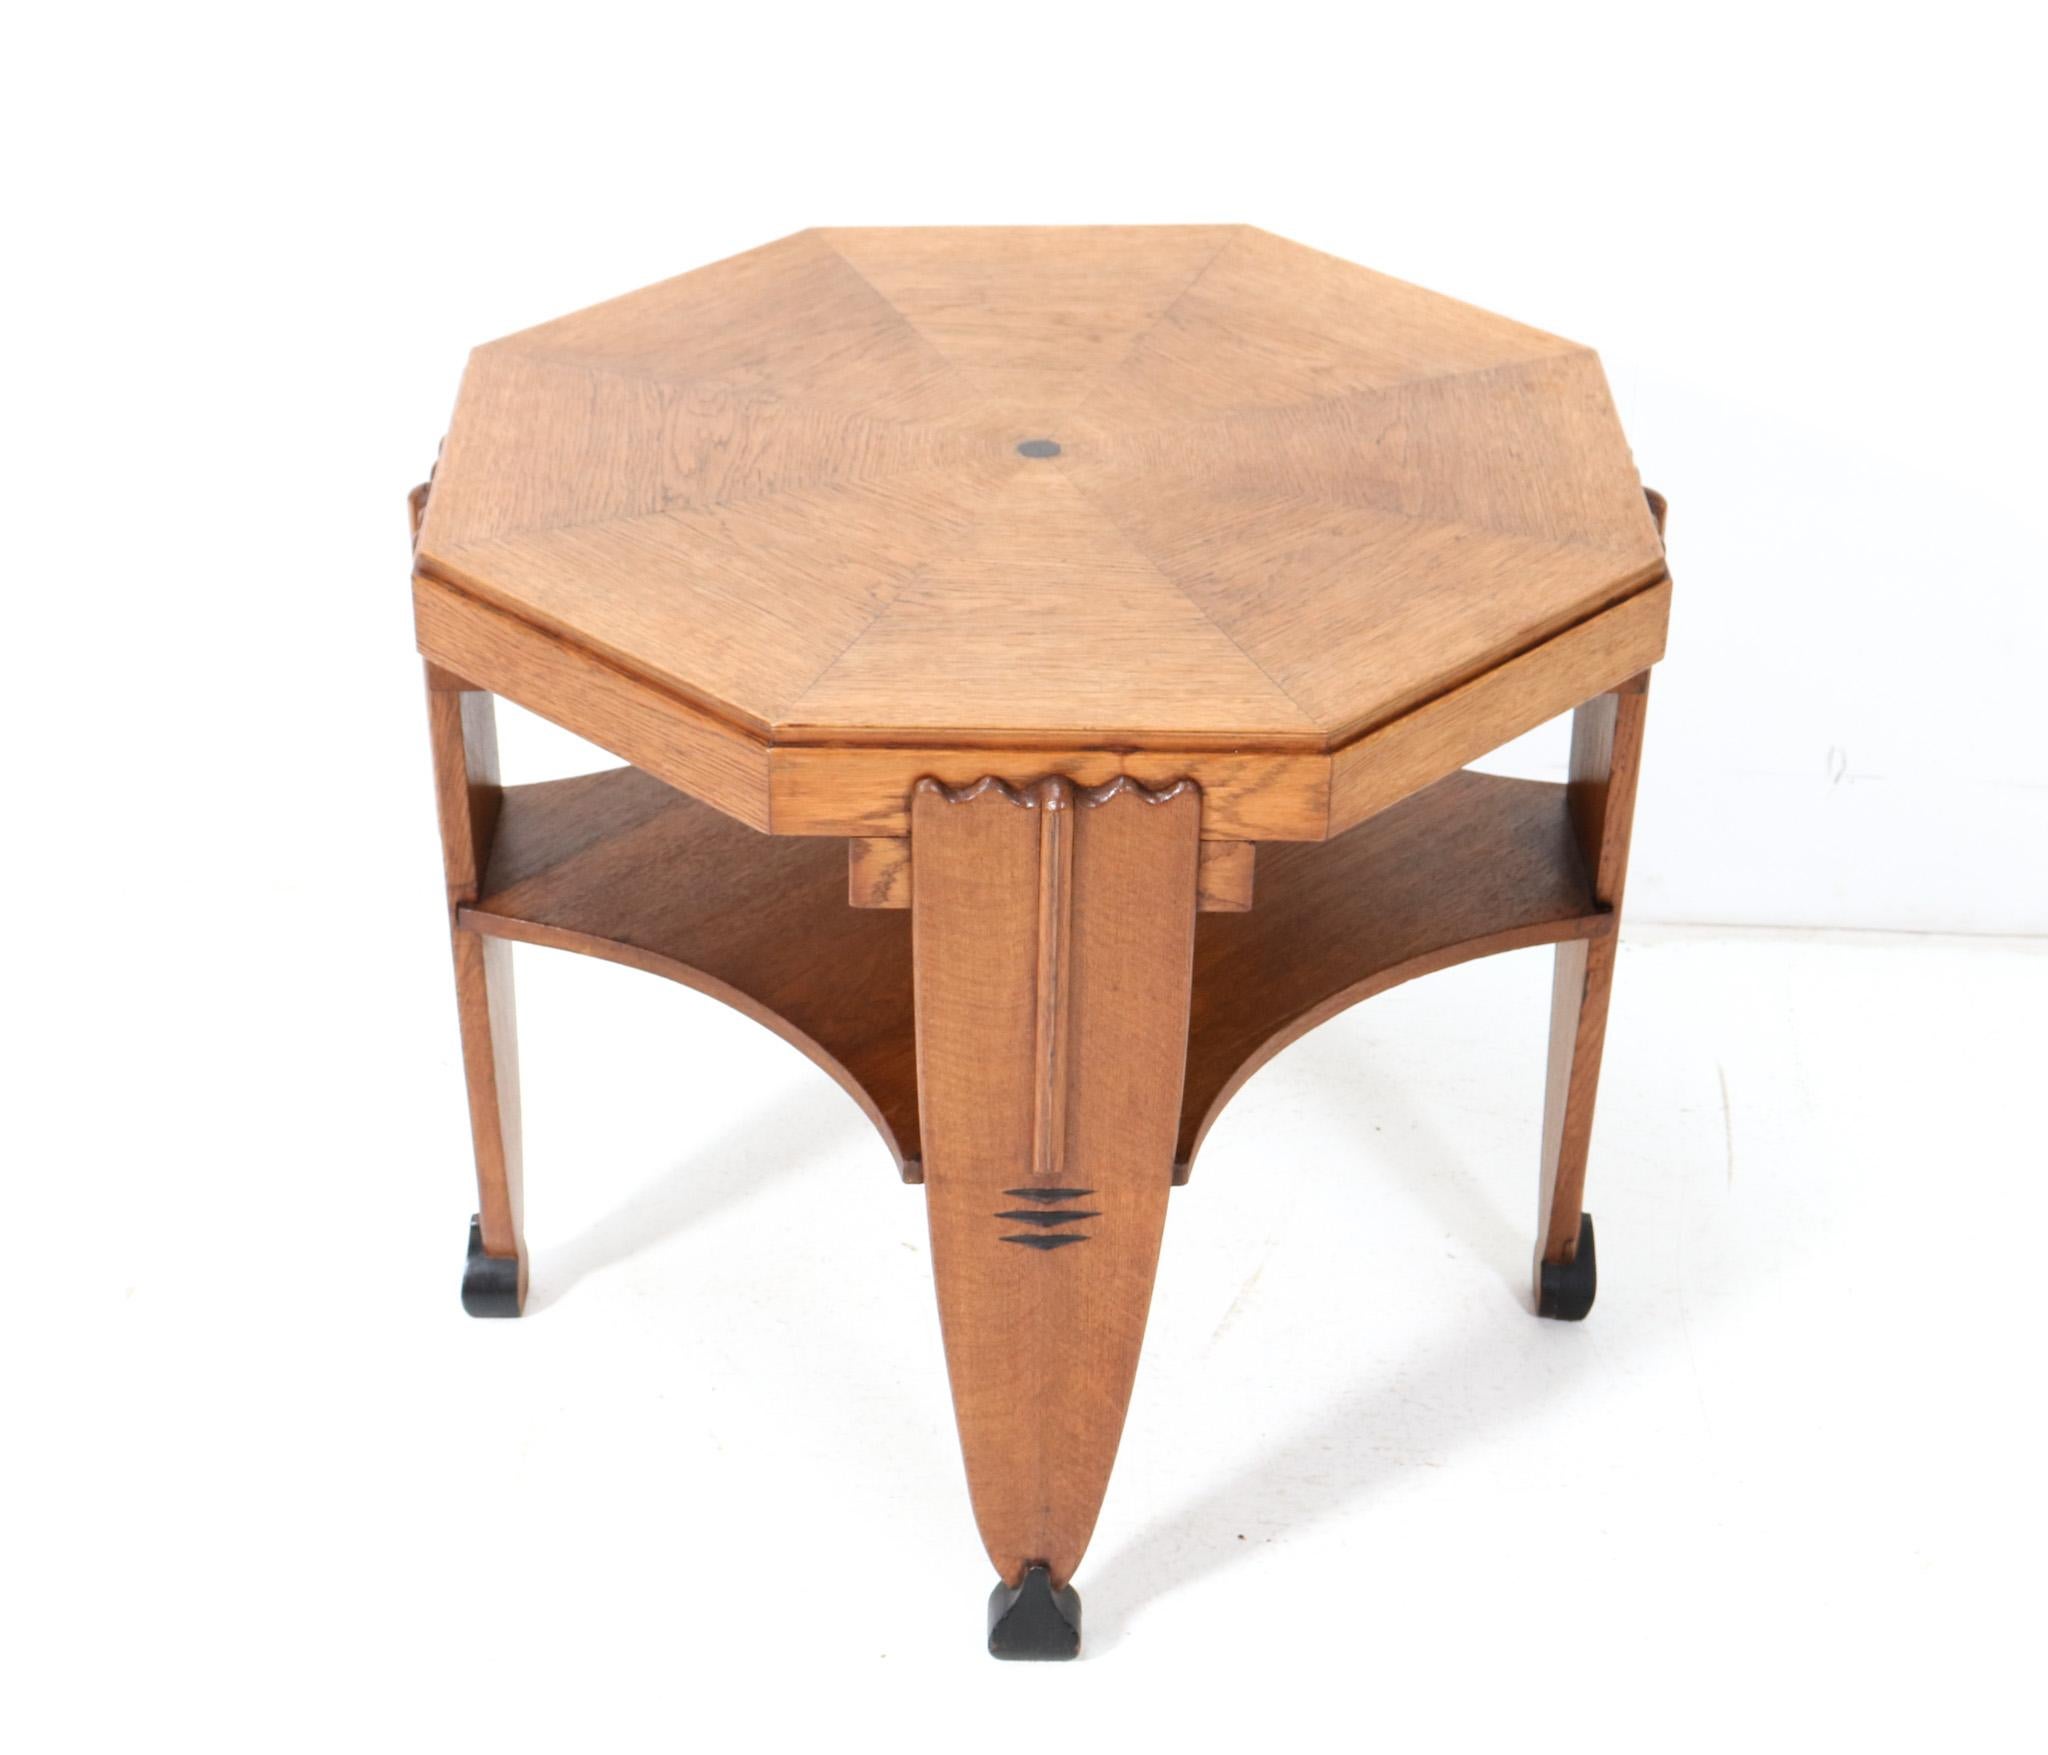 Magnificent and rare Art Deco Amsterdamse School coffee table.
Striking Dutch design from the 1920s.
Solid oak stylish frame with original oak veneered top.
This wonderful Art Deco Amsterdamse School coffee table is in very good original